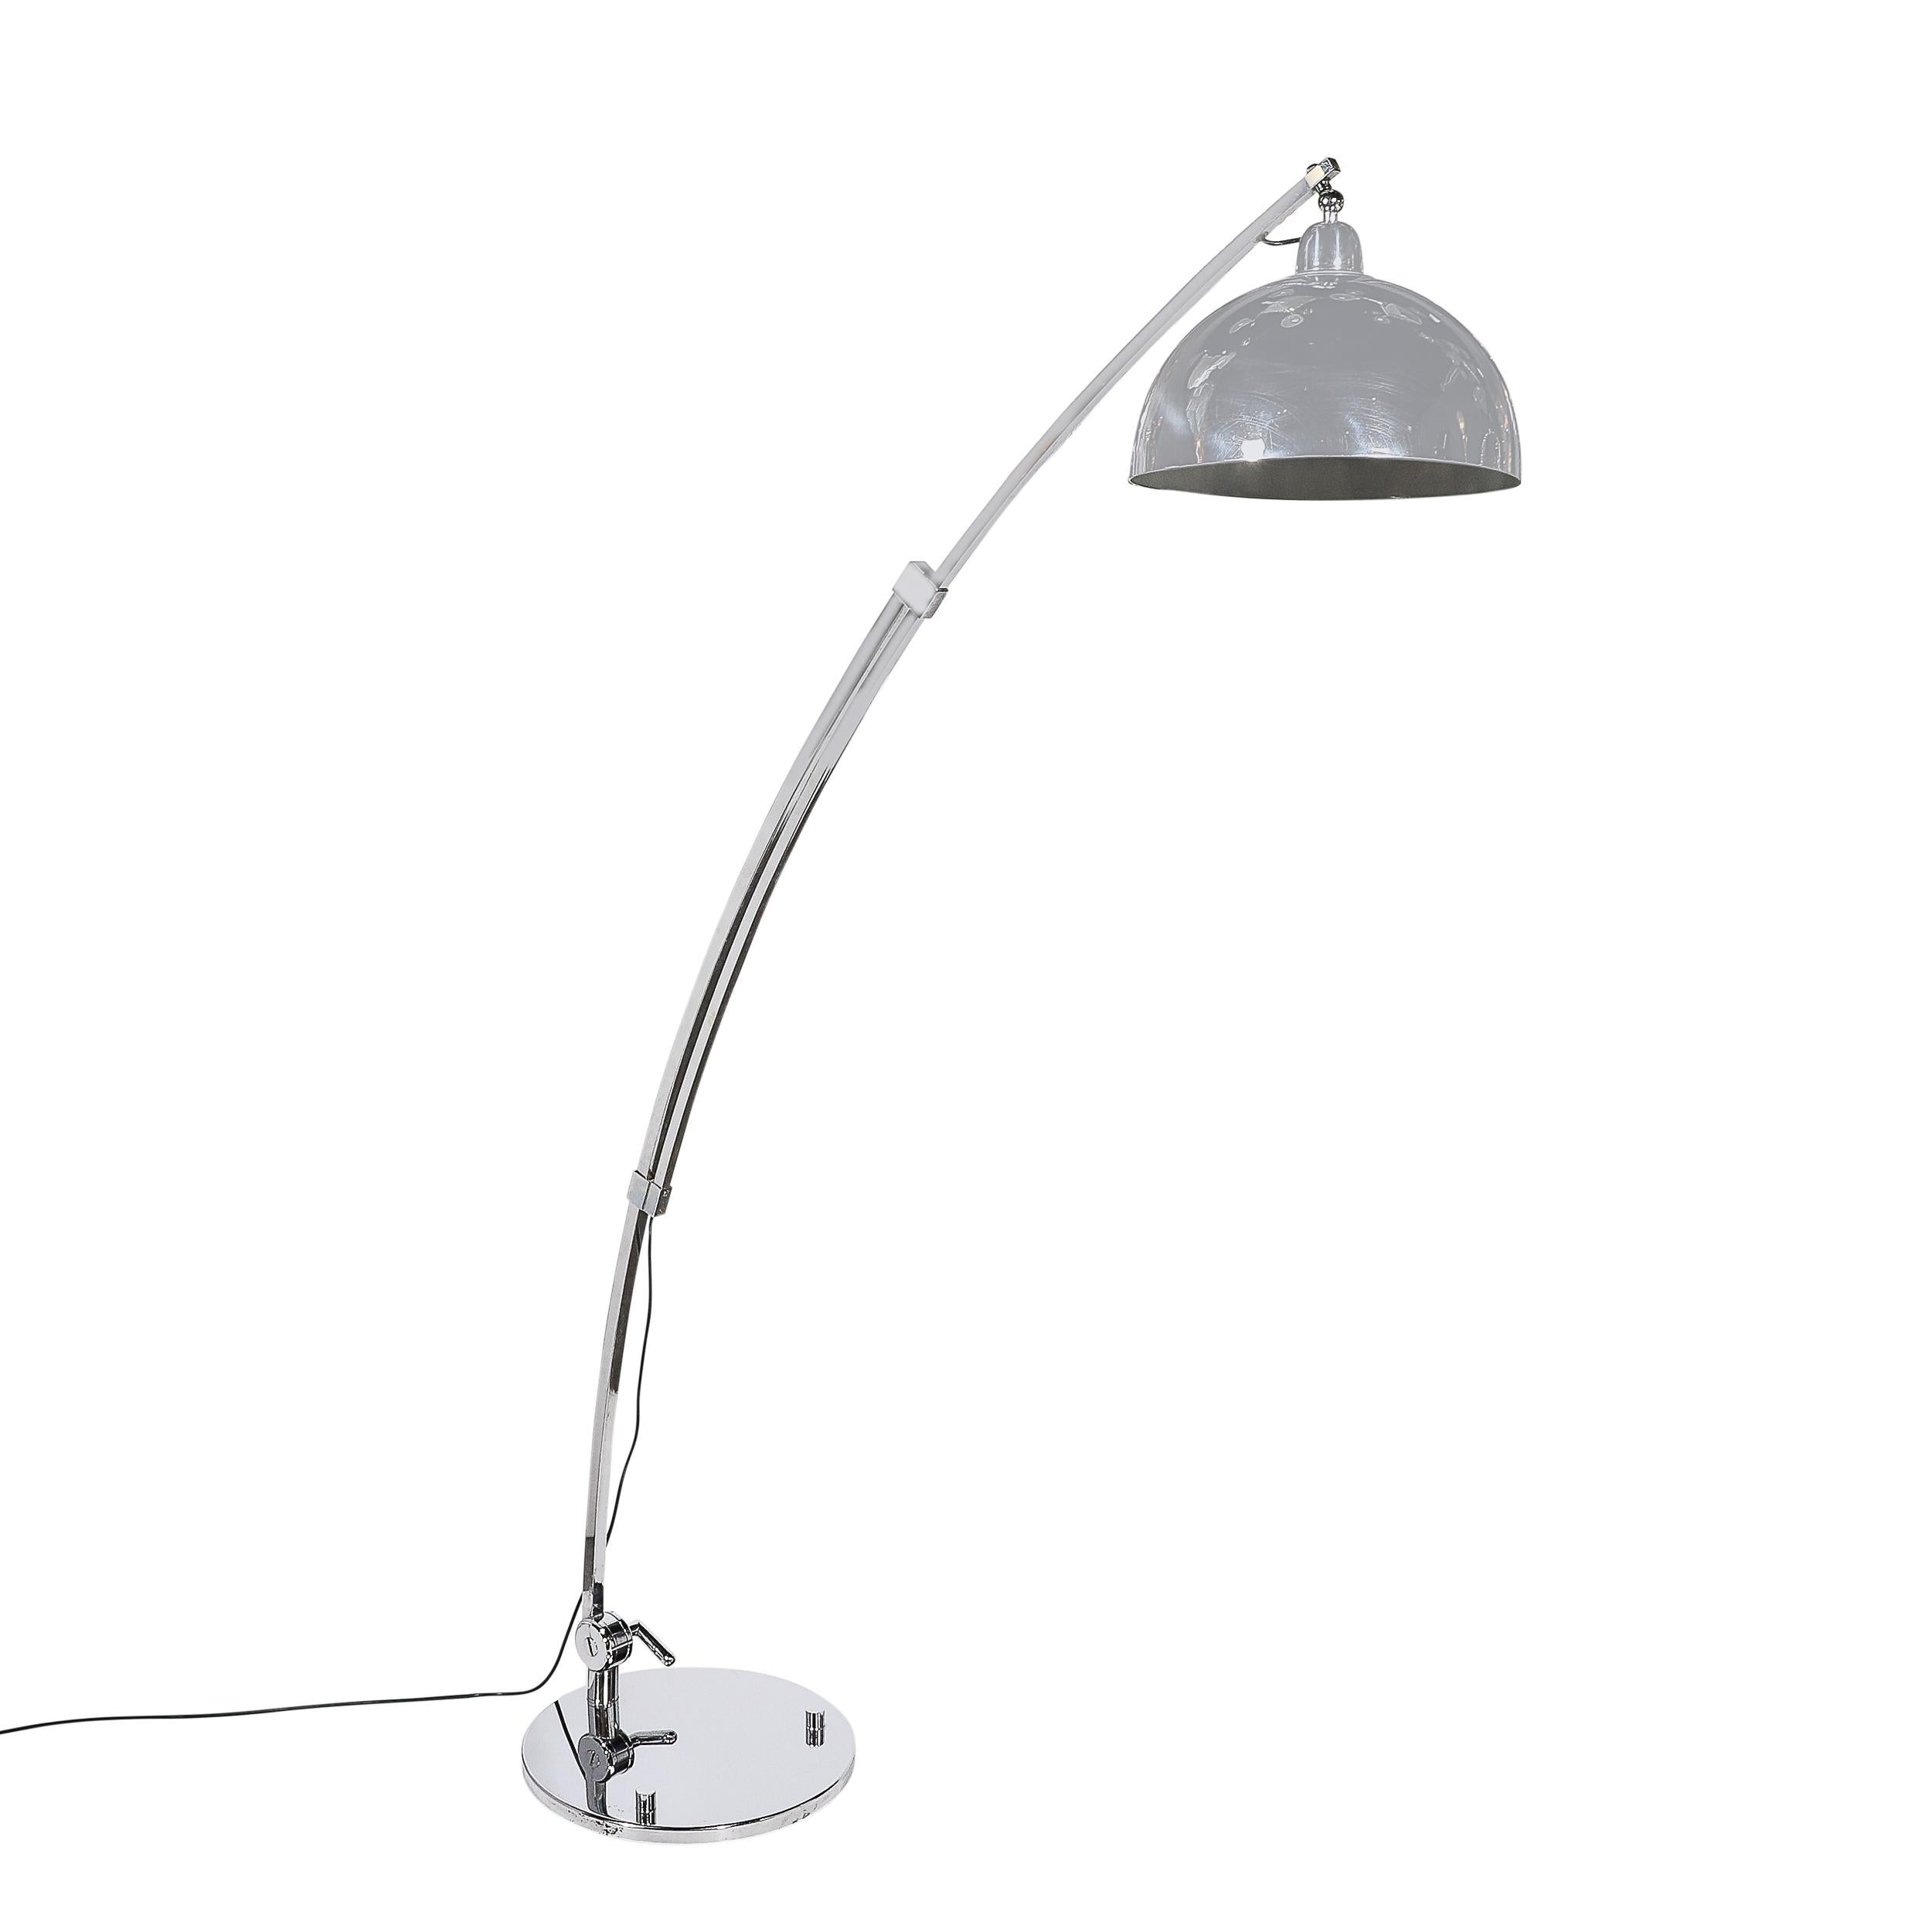 American Mid-Century Modernist Extendable Arching Floor Lamp in Polished Chrome For Sale